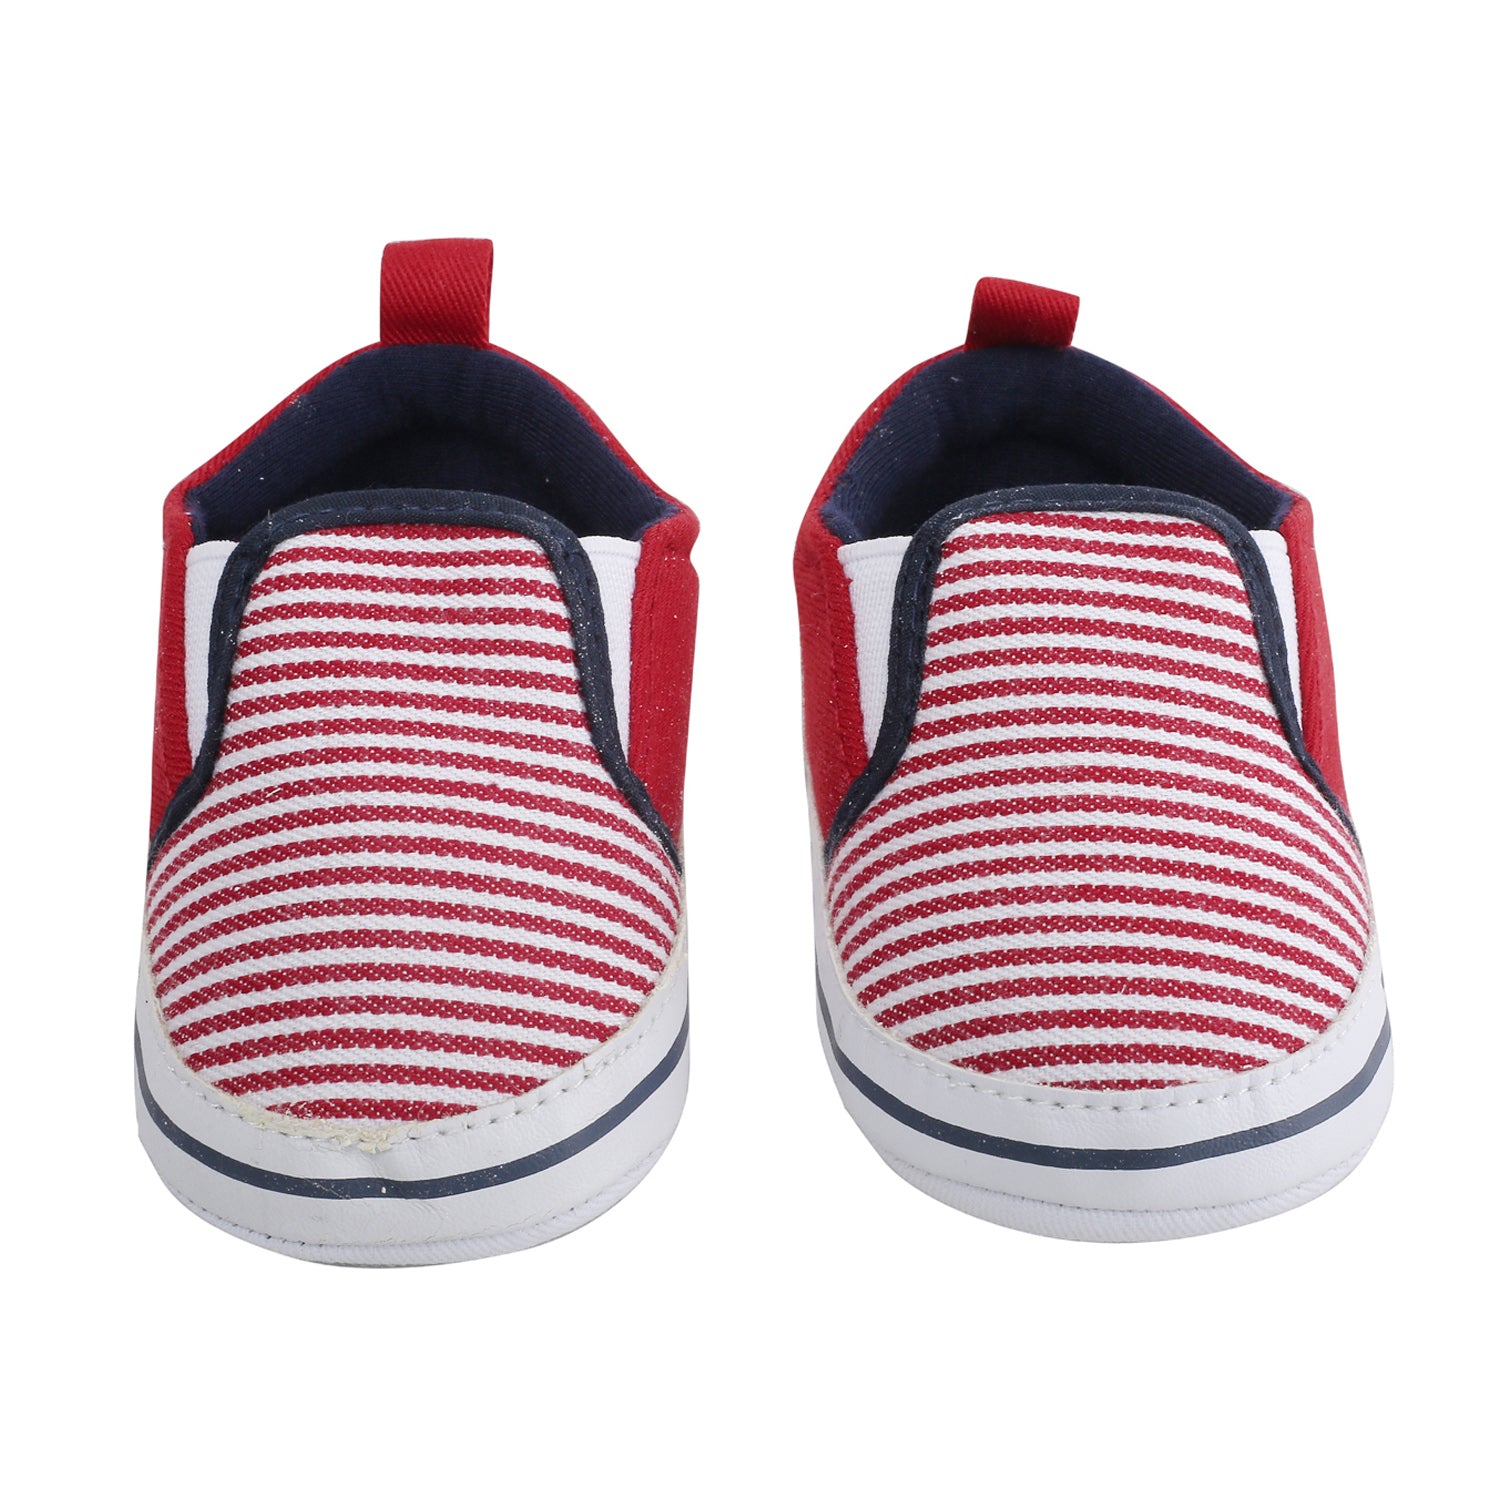 Baby Moo Striped Red Slip-On Booties - Baby Moo